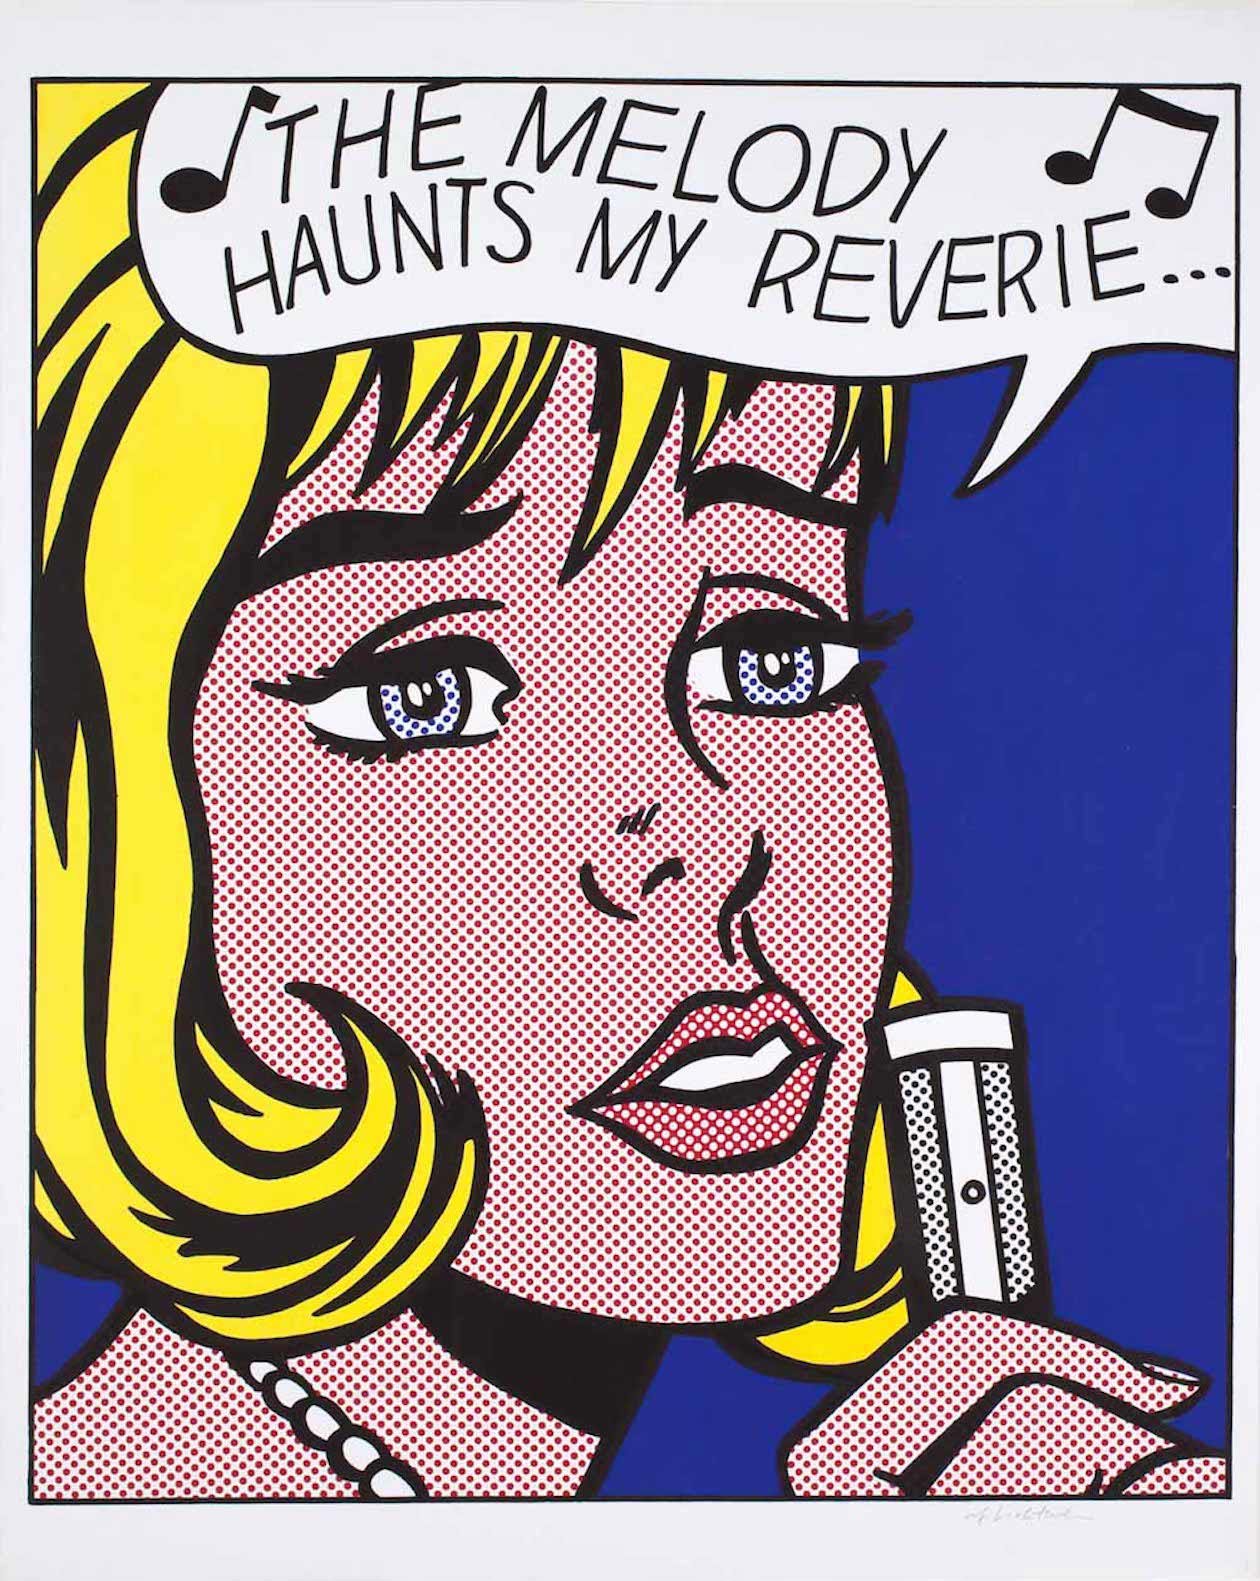 Reverie, 1965, 77 x 61 cm, Silkscreen on paper. Credit line: Lex Harding Collection. Copyright © 2022 Estate of Roy Lichtenstein. Copyright © Estate of Roy Lichtenstein by SIAE 2023.